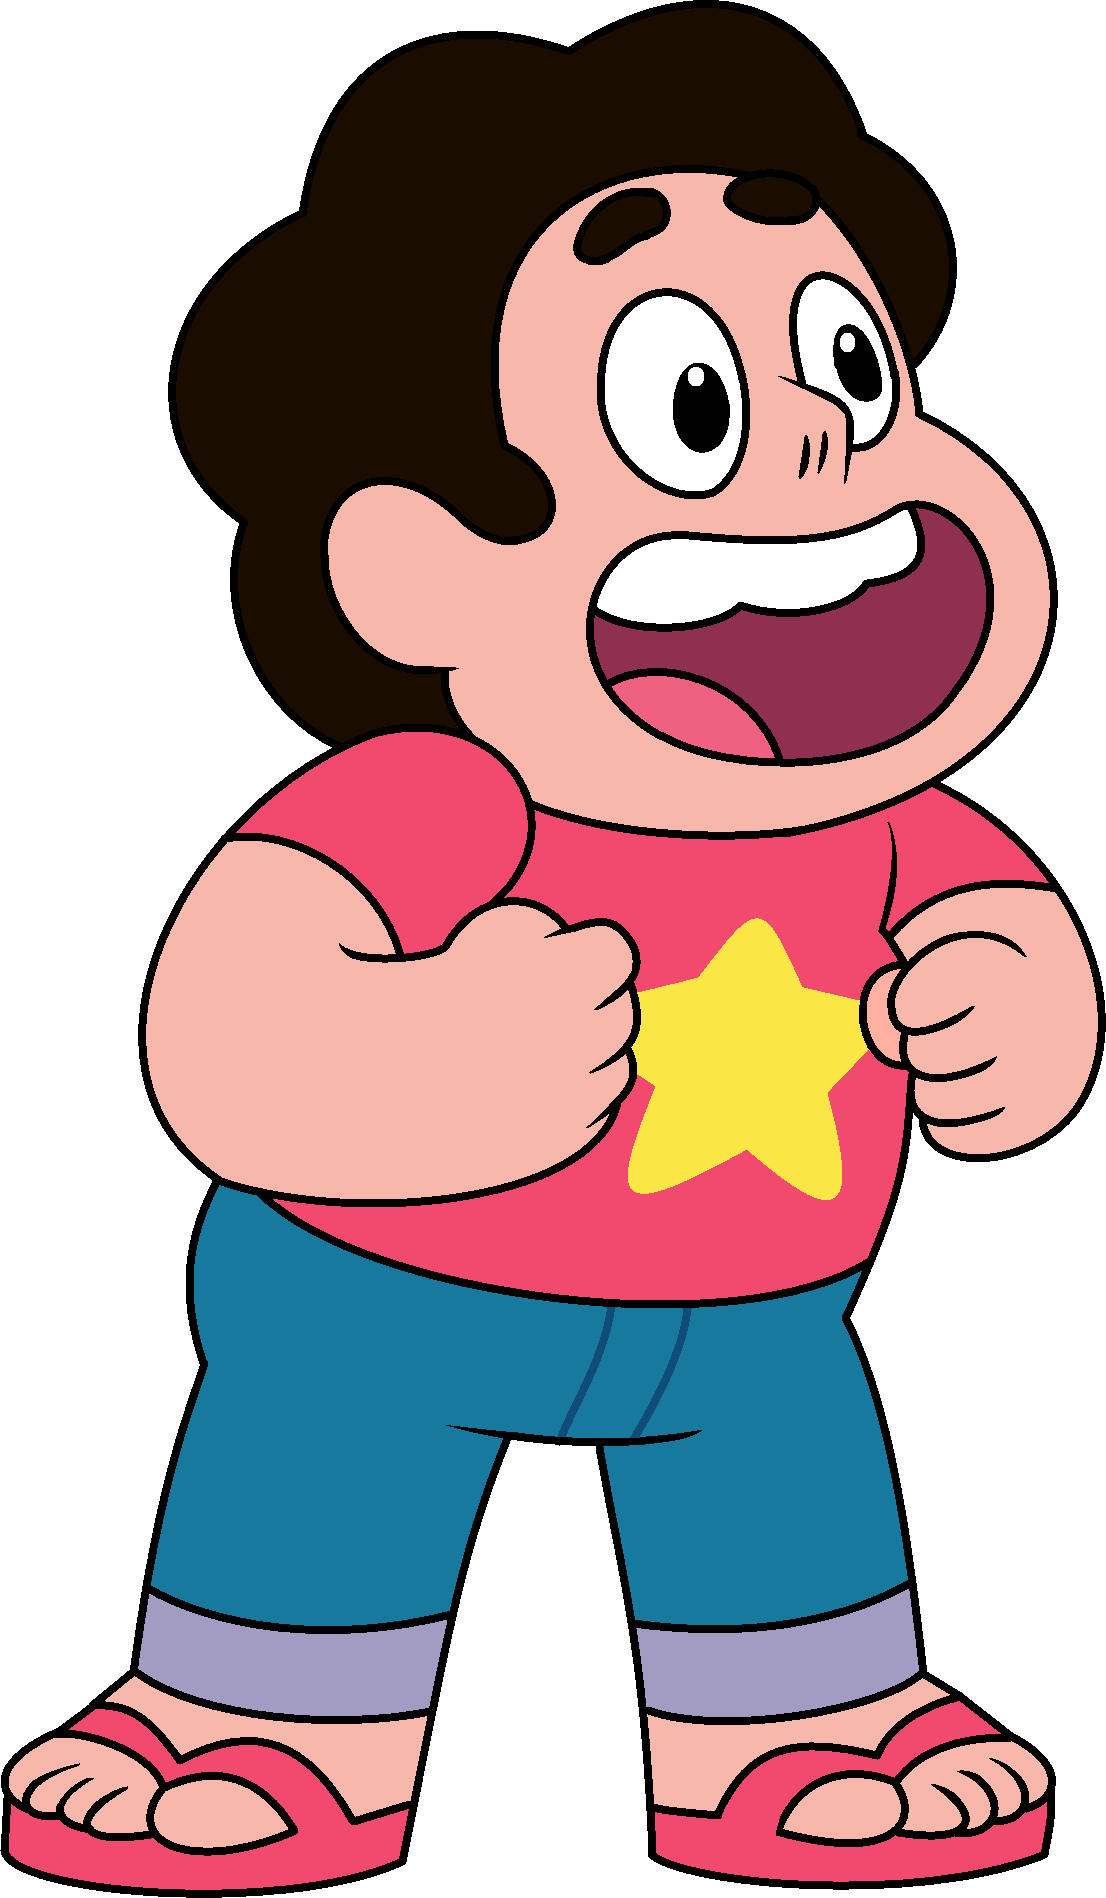 Download PNG image - Animated Steven Universe PNG Image 